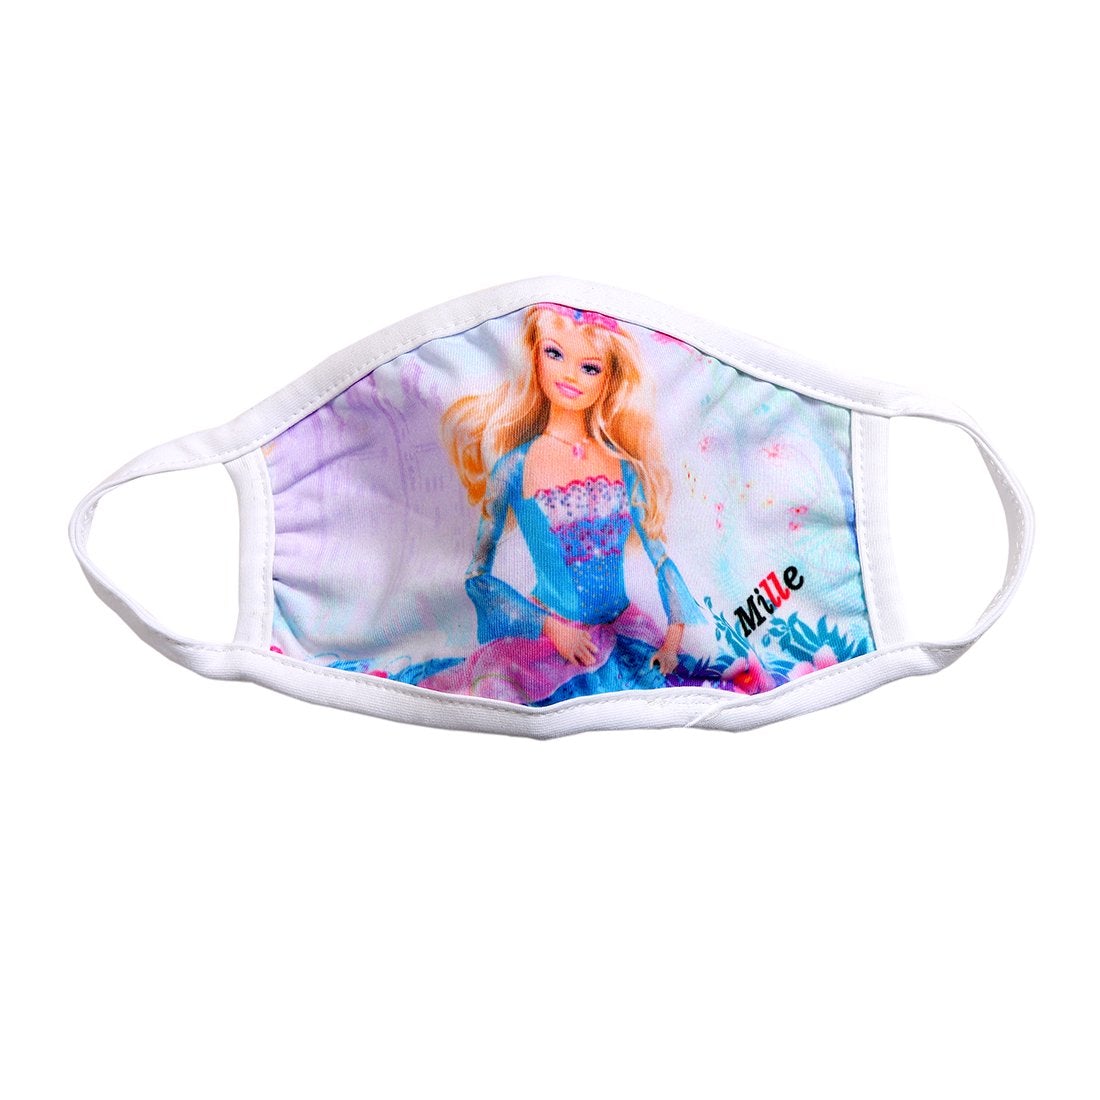 Barbie Face Mask -Printed Cloth Washable Reusable Face Mask Cover